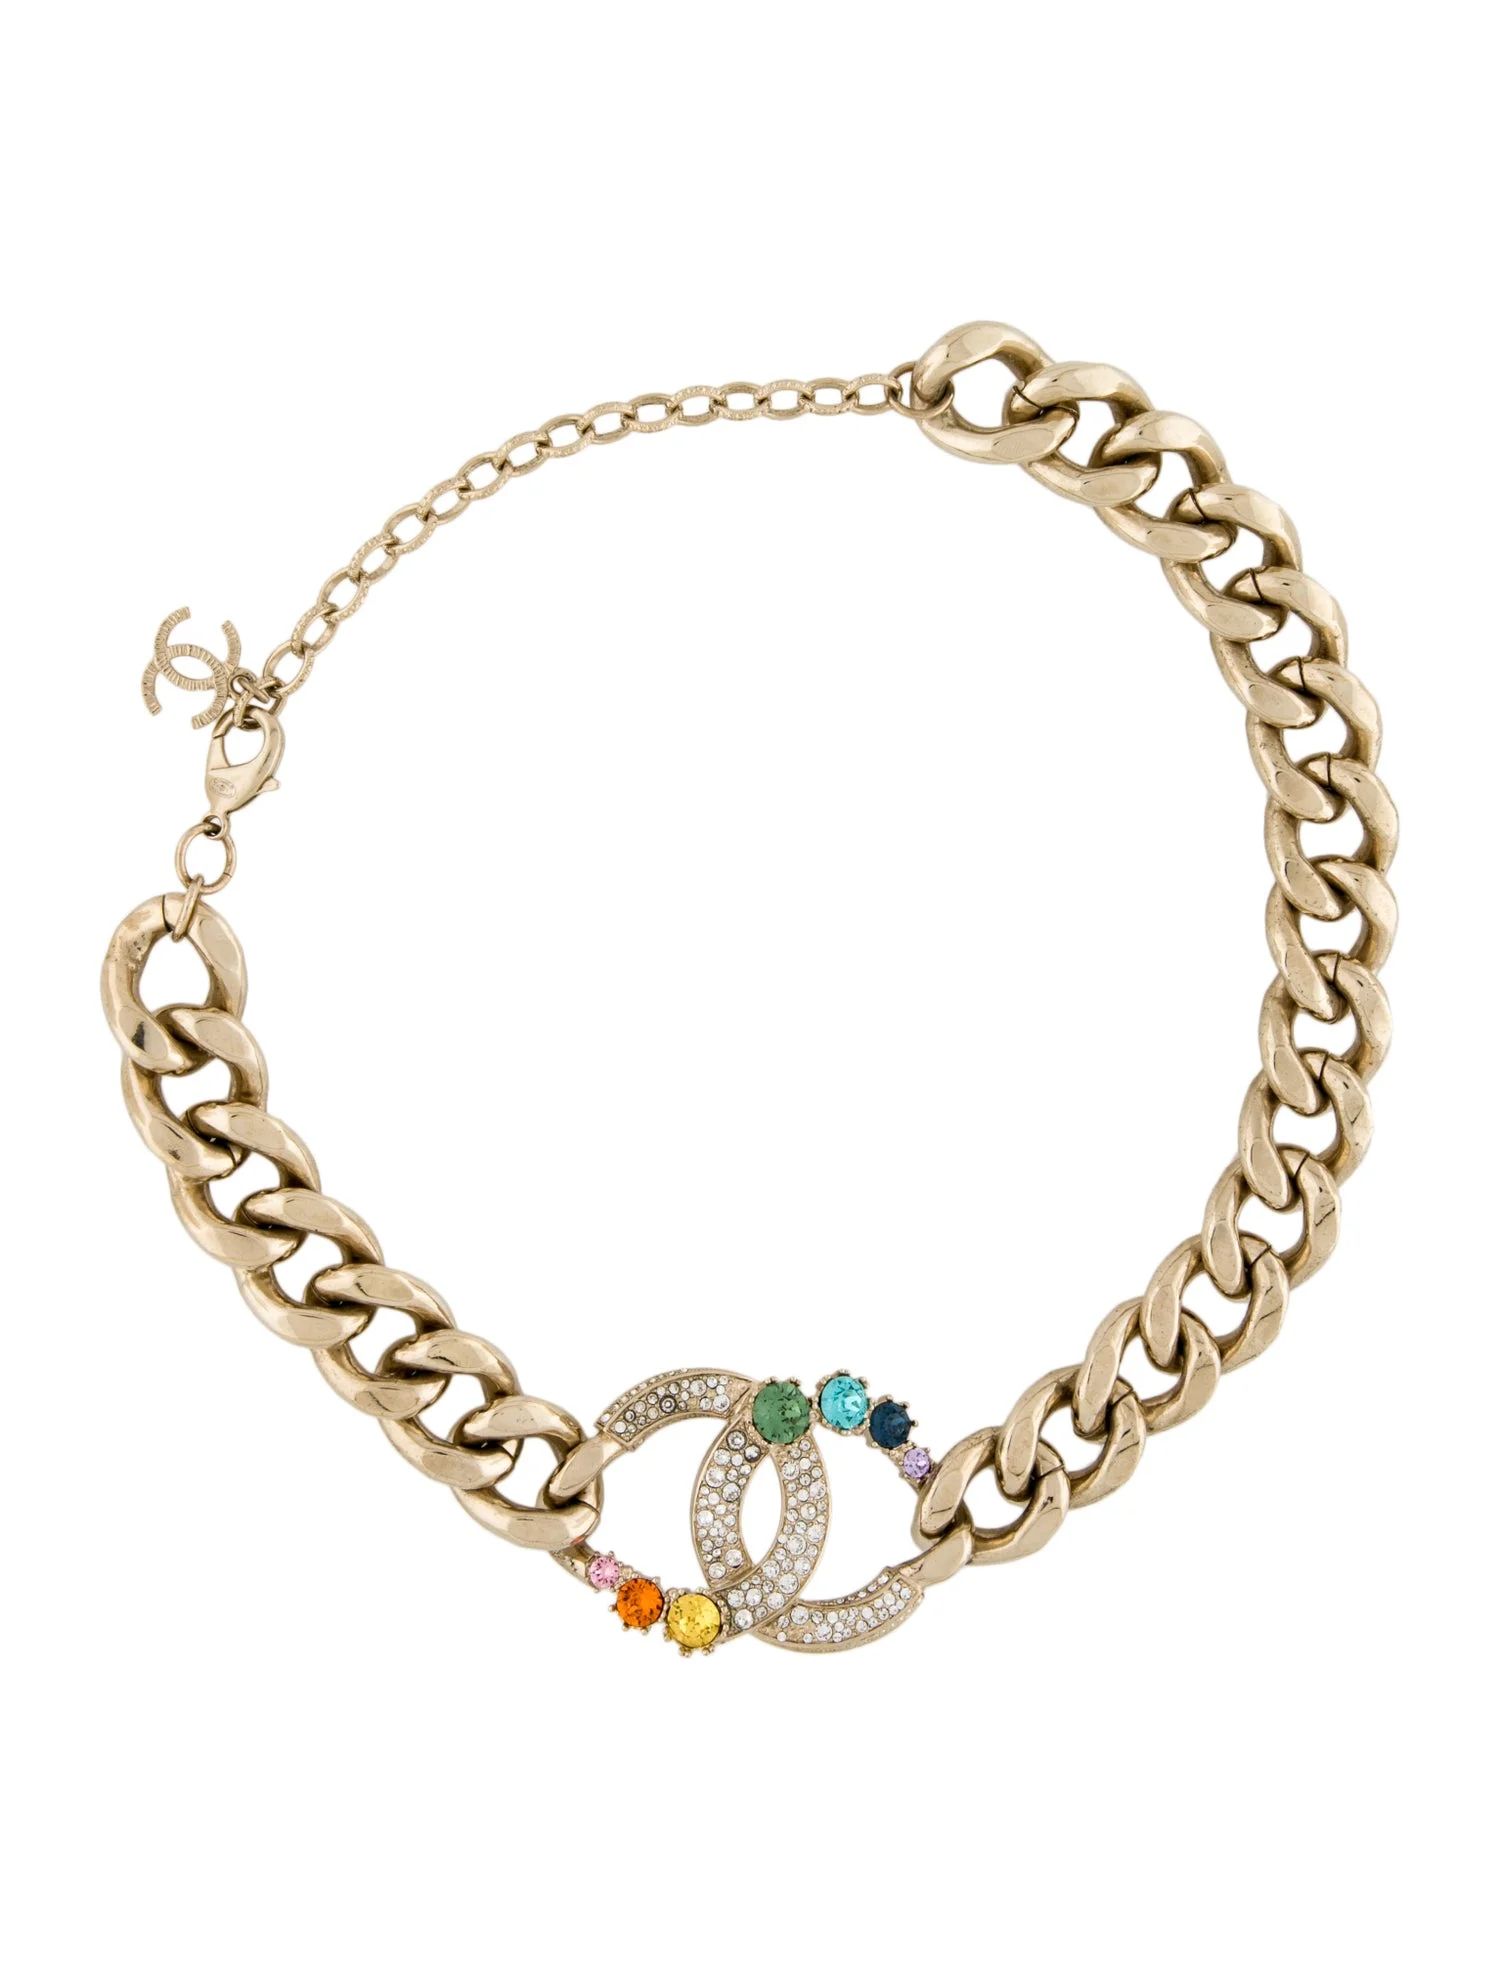 2019 Strass CC Chain Link Necklace | The RealReal